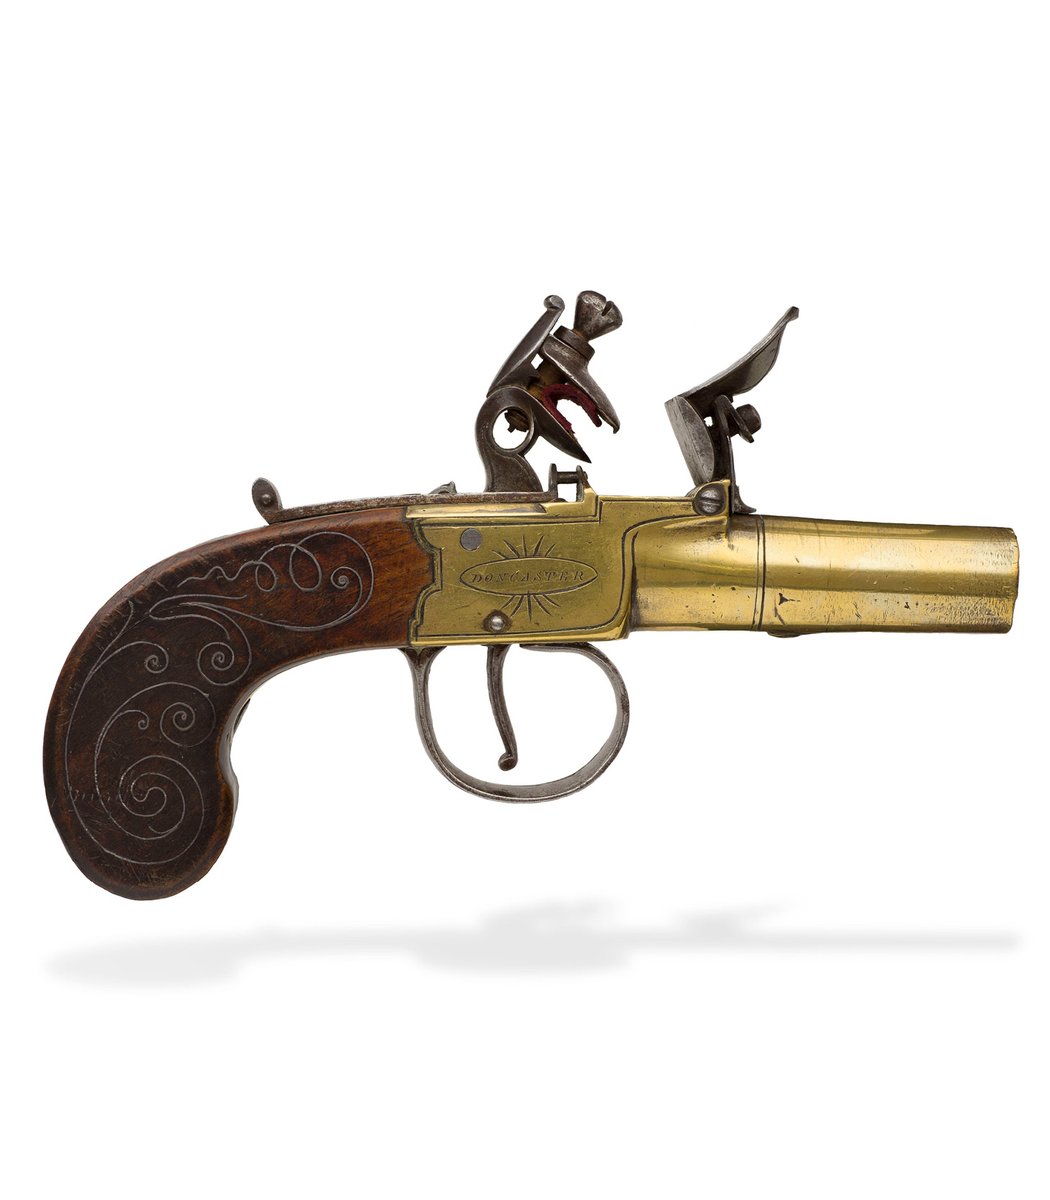 In Airborne Sean dies from a pistol shot to the chest!We have this Flintlock boxlock pistol, 1770-1820. Calibre approximately .500